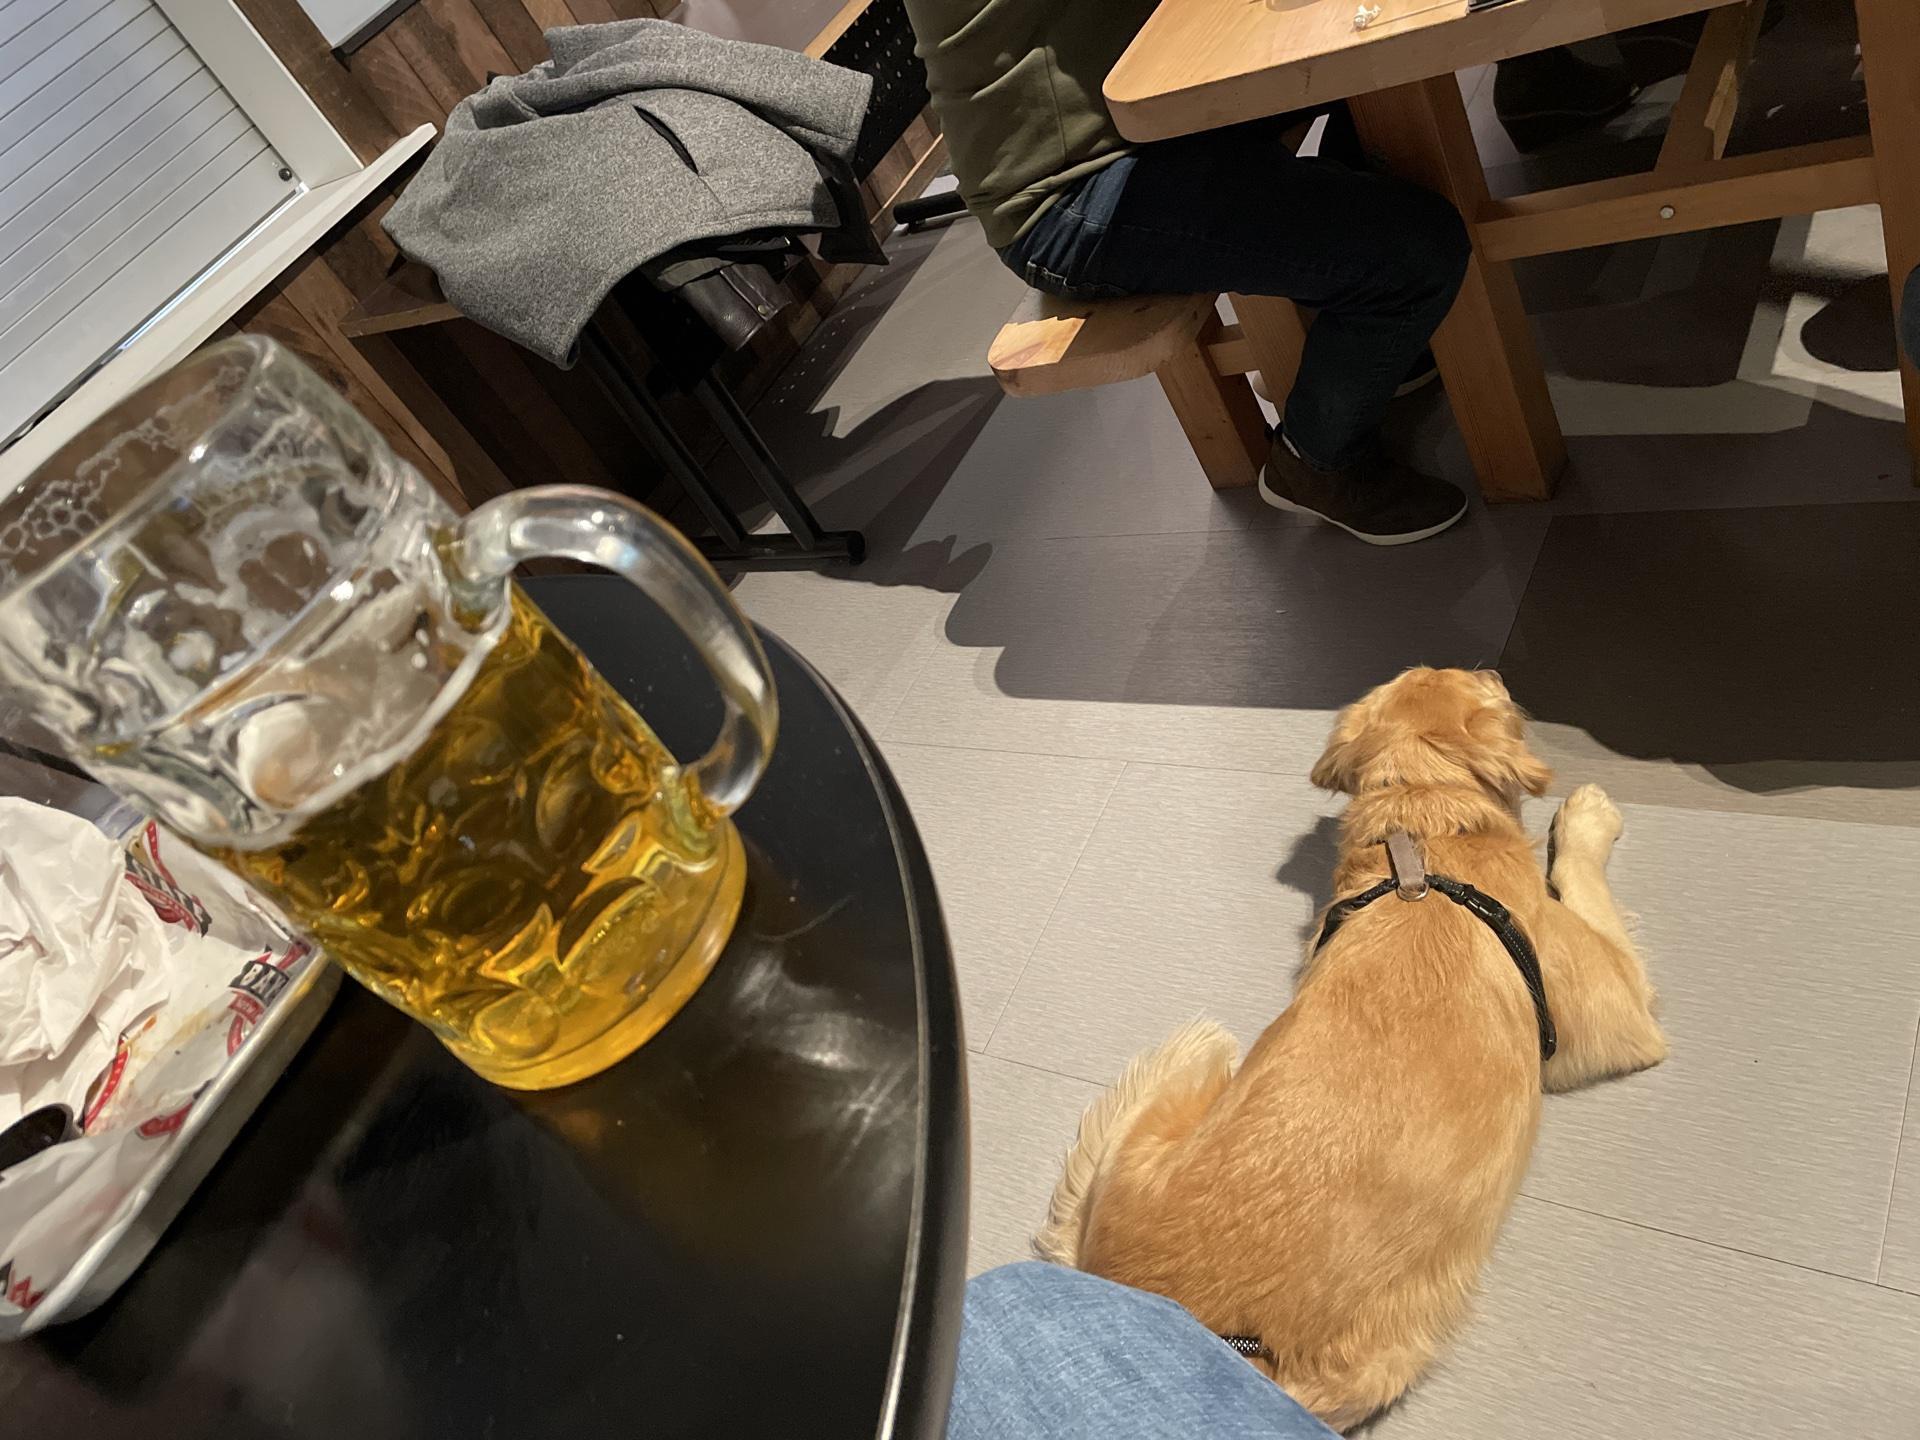 Pet Friendly Bay State Brewery & Tap Room